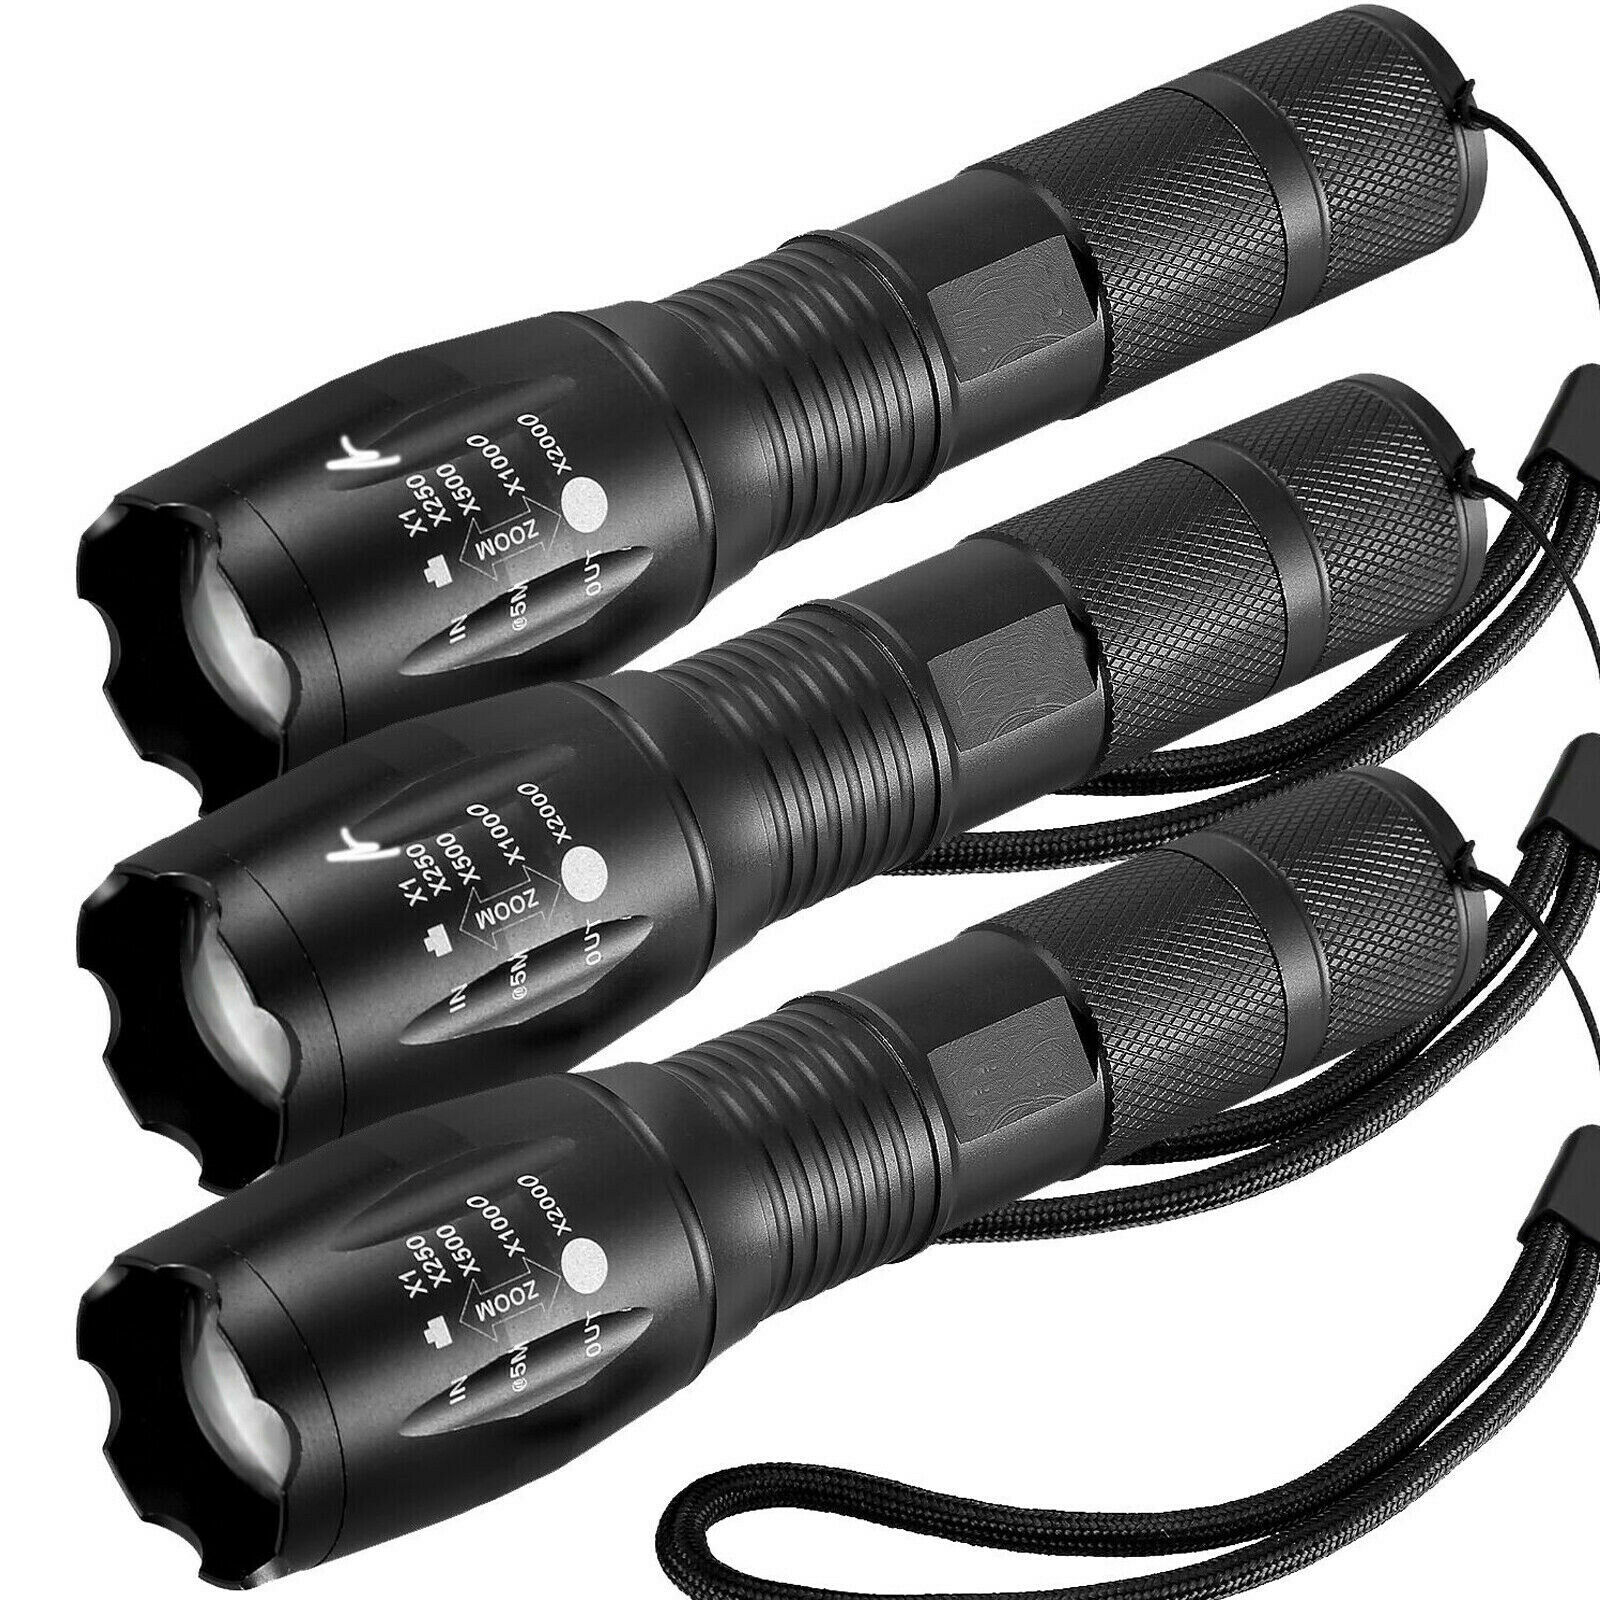 3 X Tactical 18650 Flashlight T6 High Powered 5modes Zoomable Aluminum